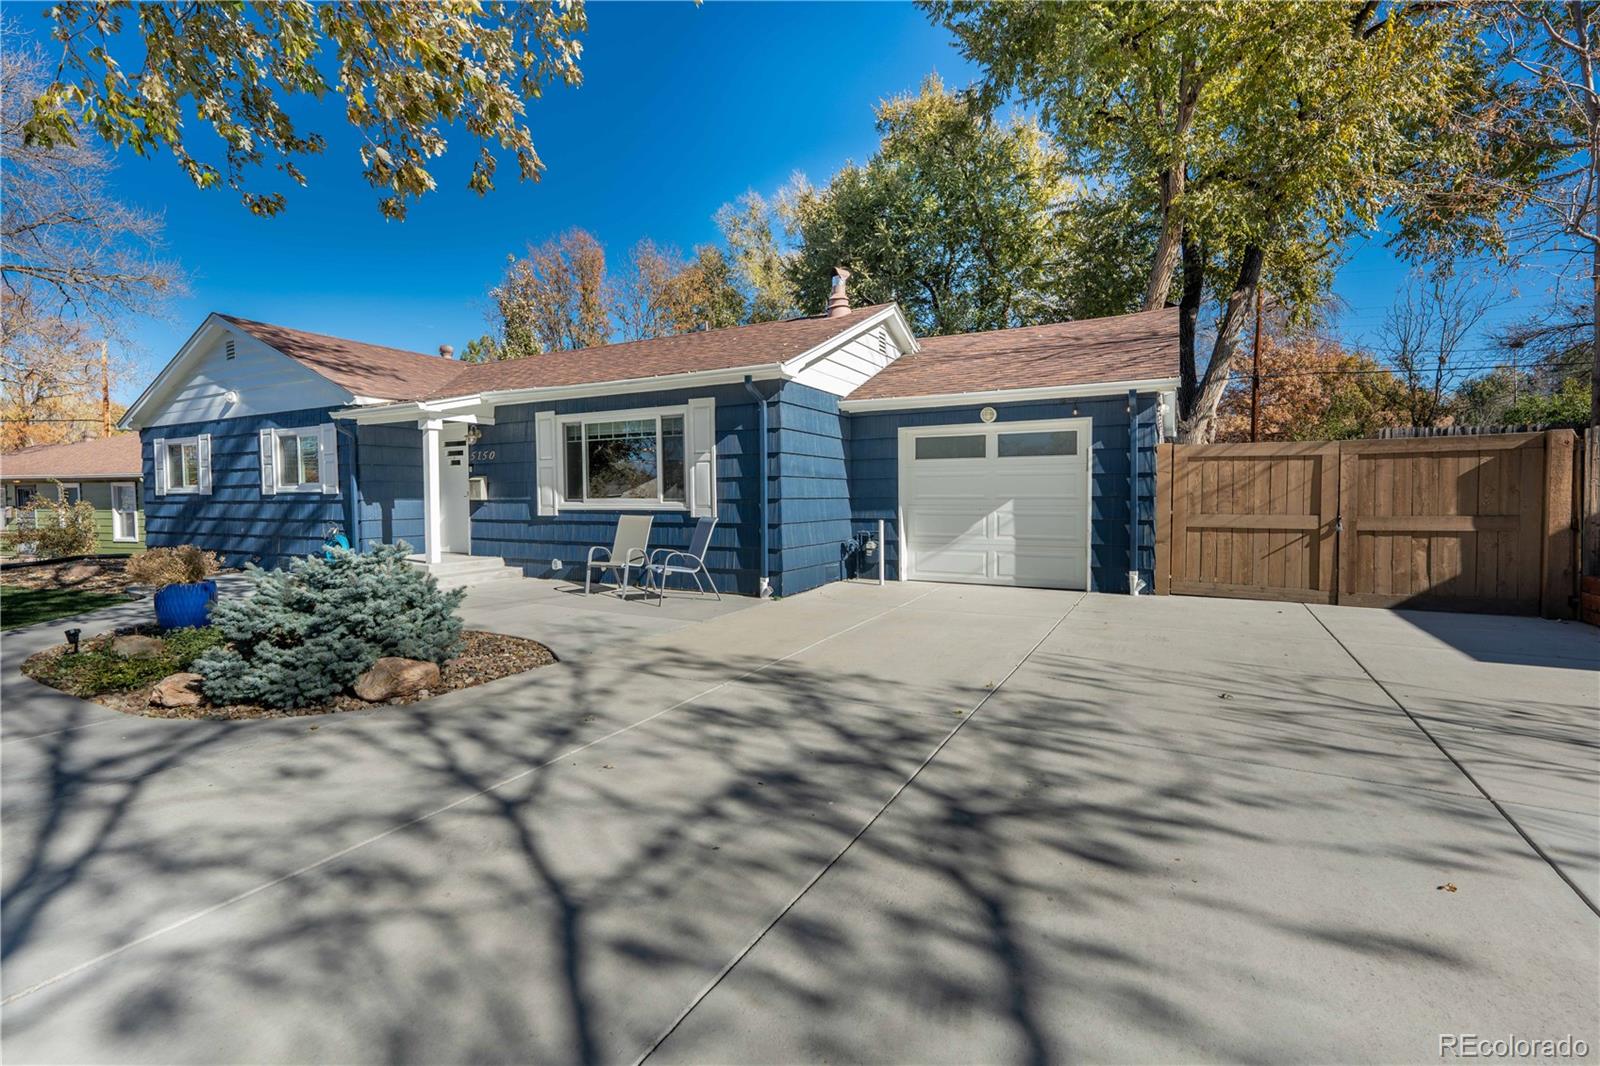 5150 s washington street, Littleton sold home. Closed on 2024-01-26 for $569,000.